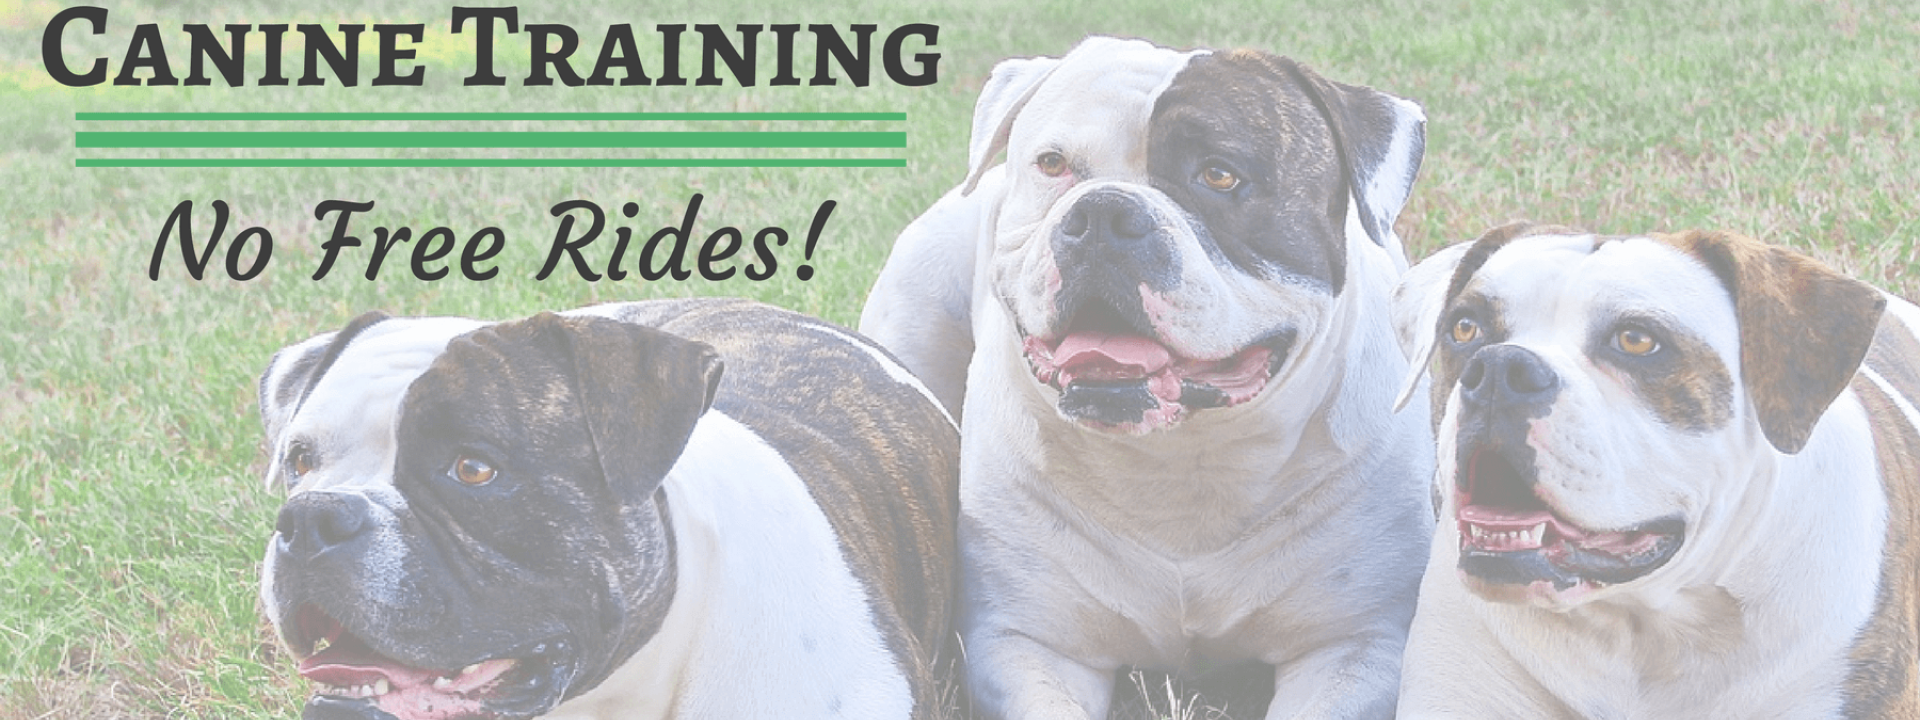 blog-title-canine-training.png